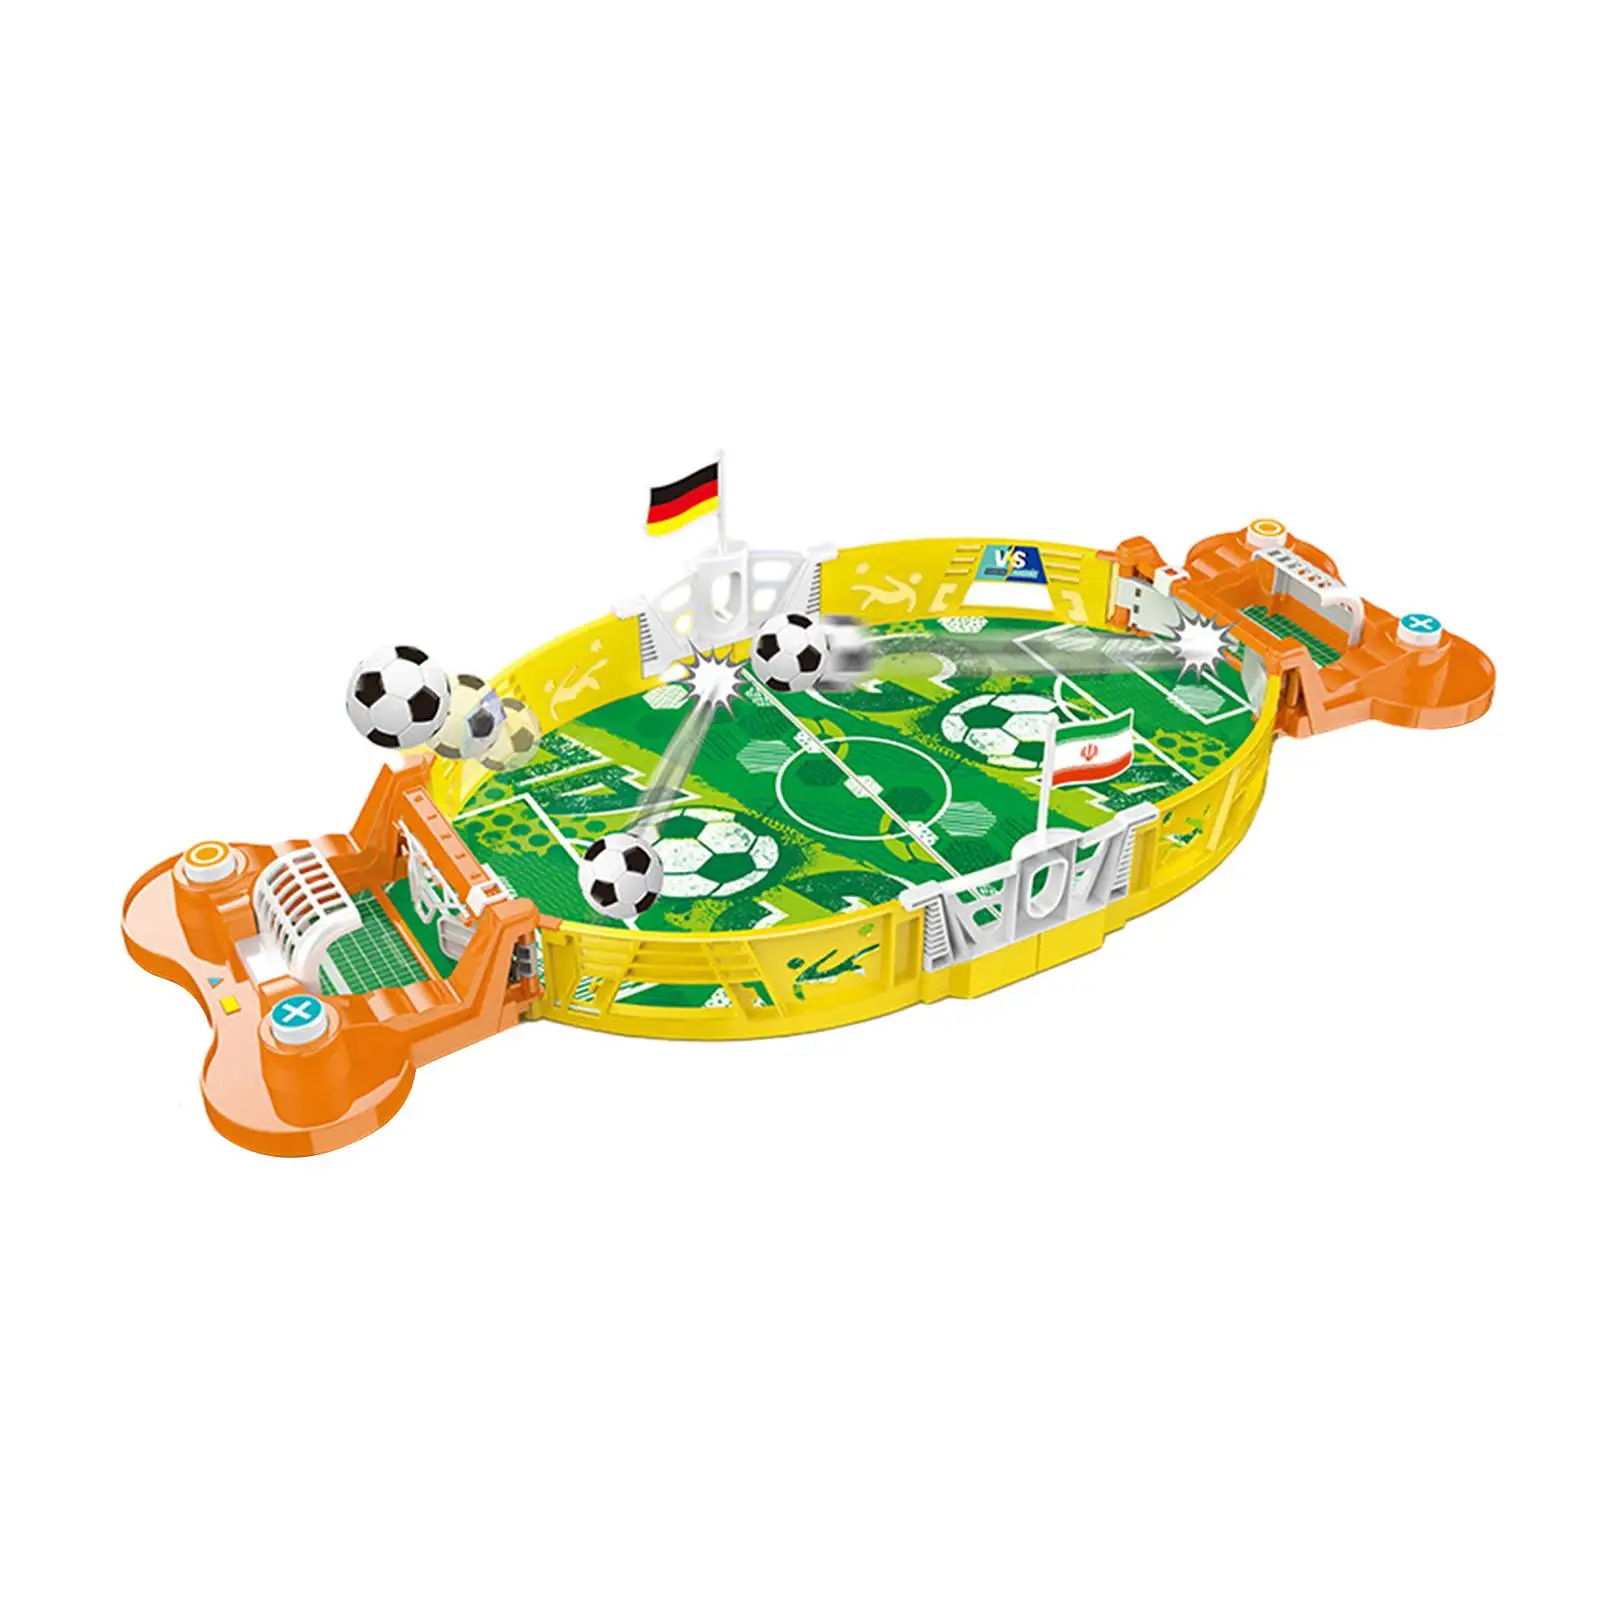 Mini Foosball Games, Tabletop Football Soccer Pinball Game for Indoor Game, Desktop Sport Board Game for Family Game,Party